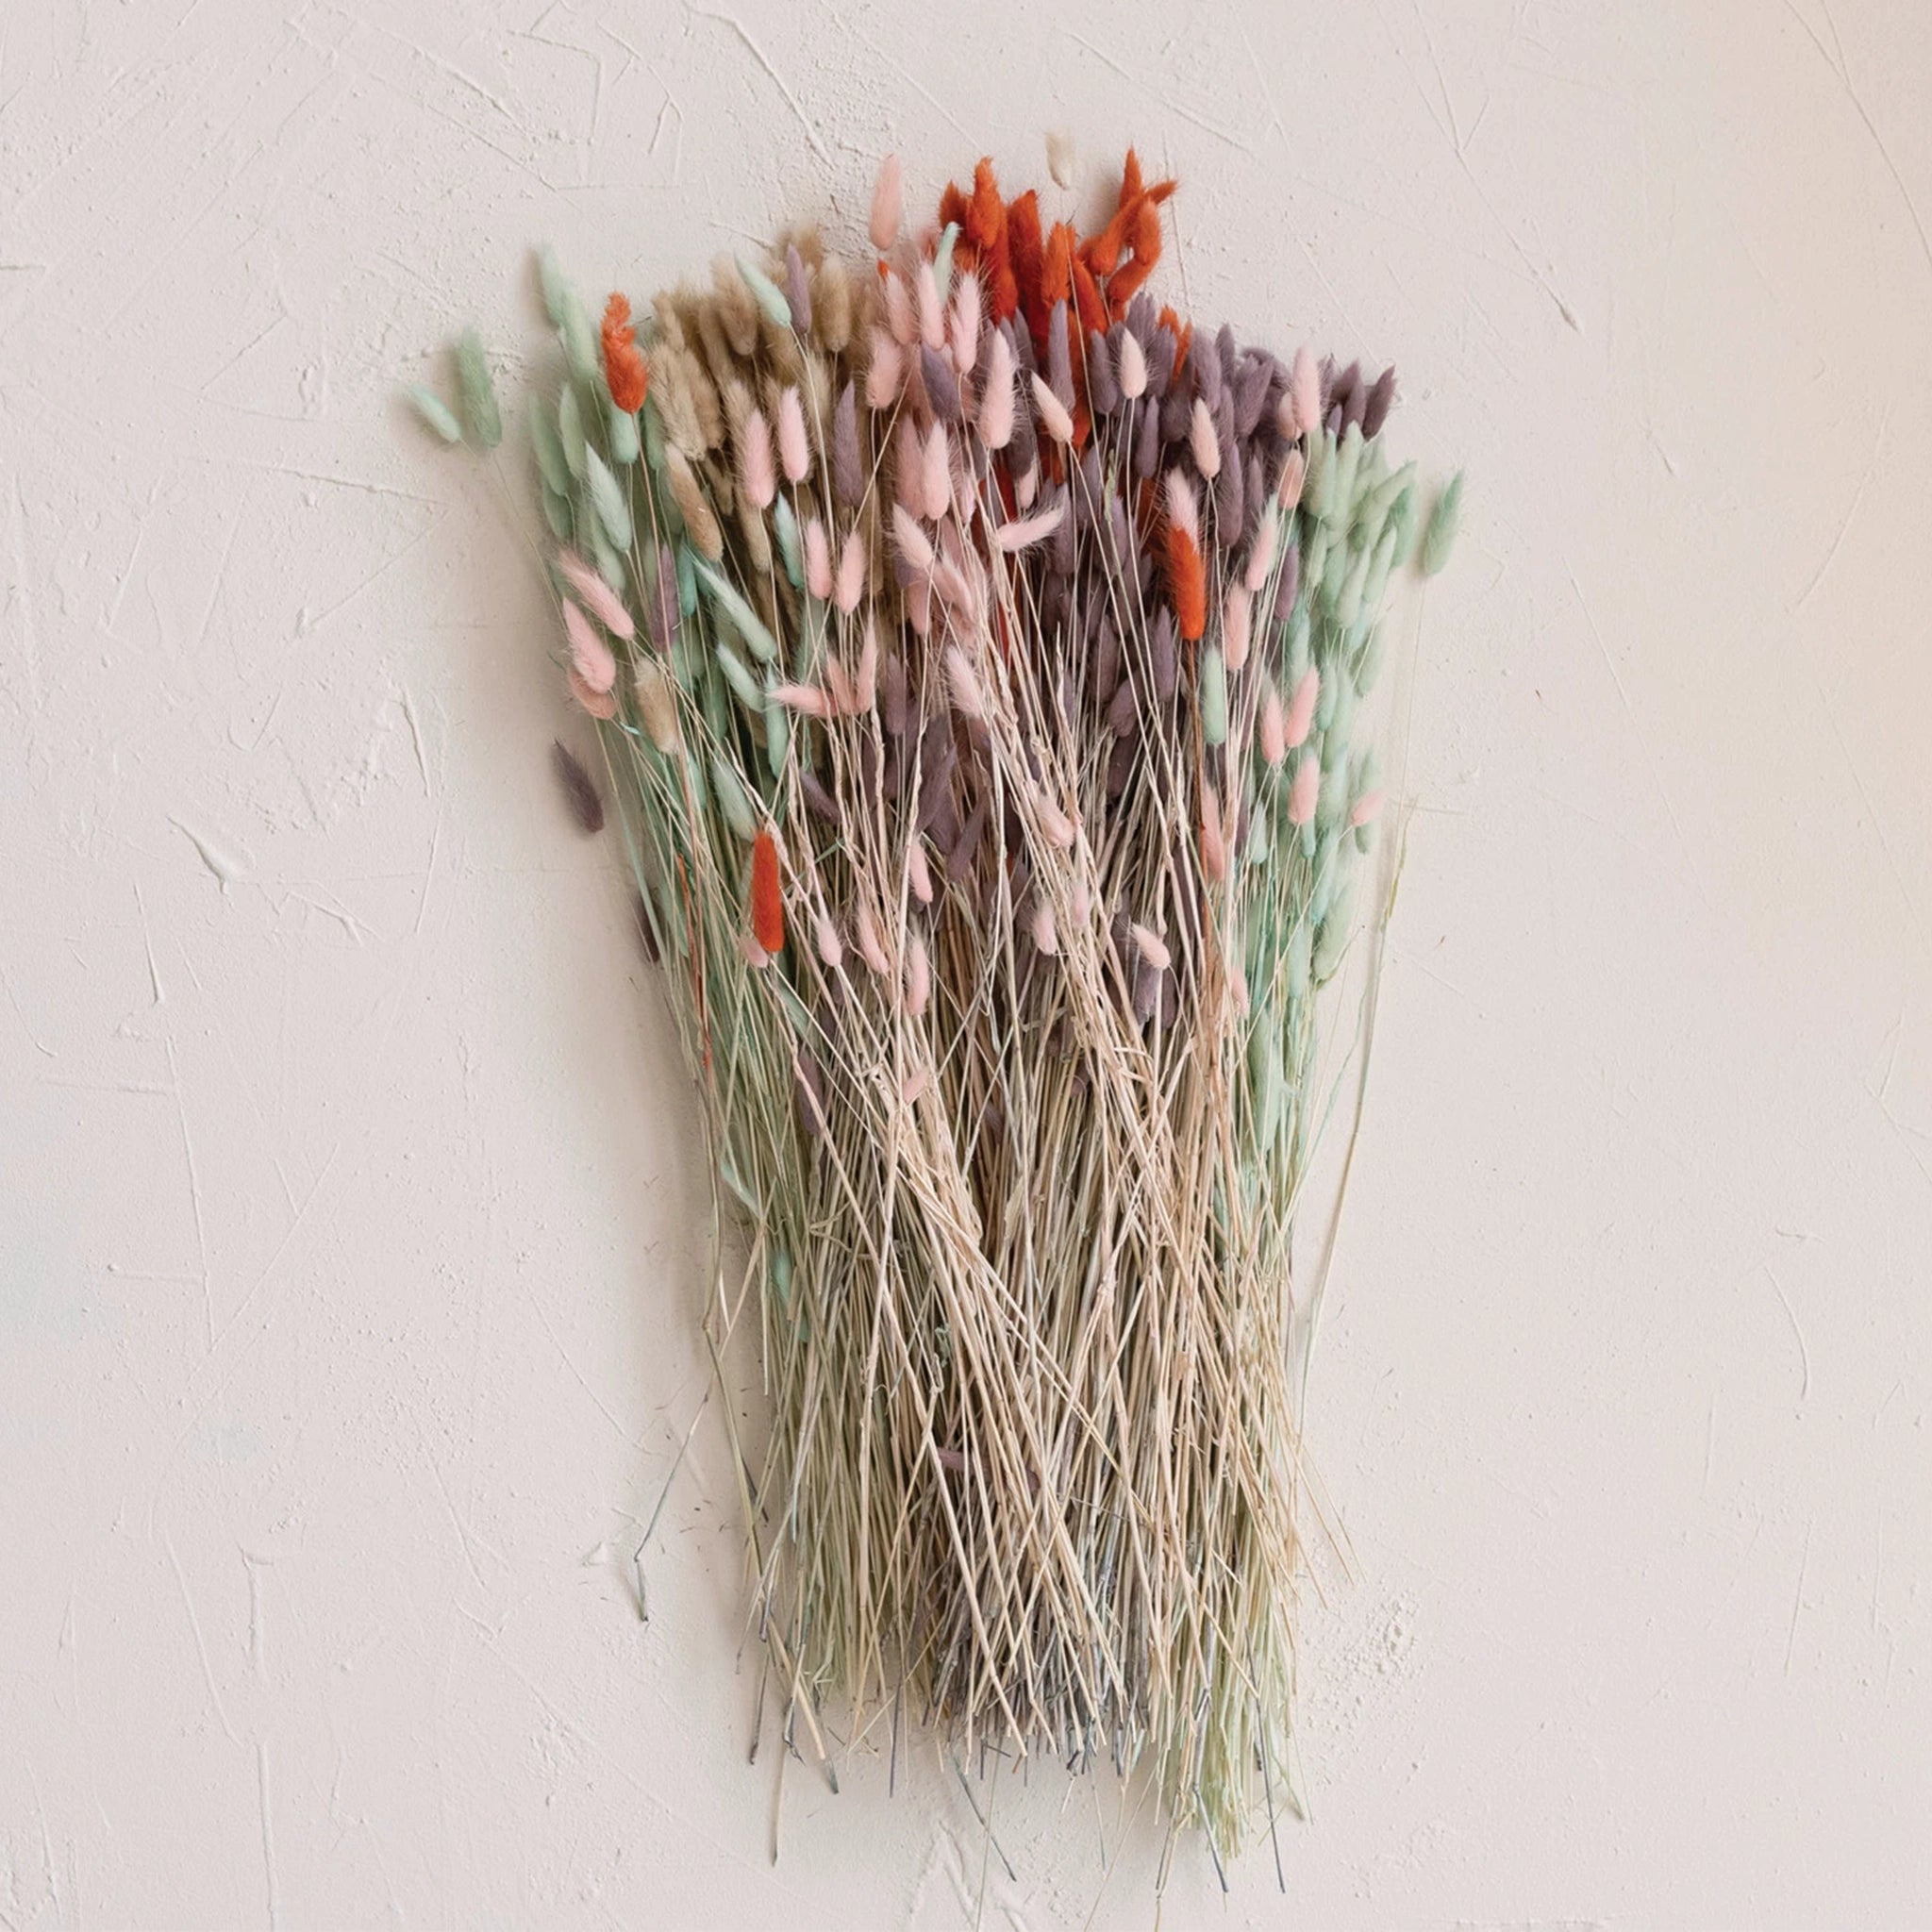 A bundle of natural colored dried bunny tail florals photographed with the other color ways that we carry on our website, pink and lavender.